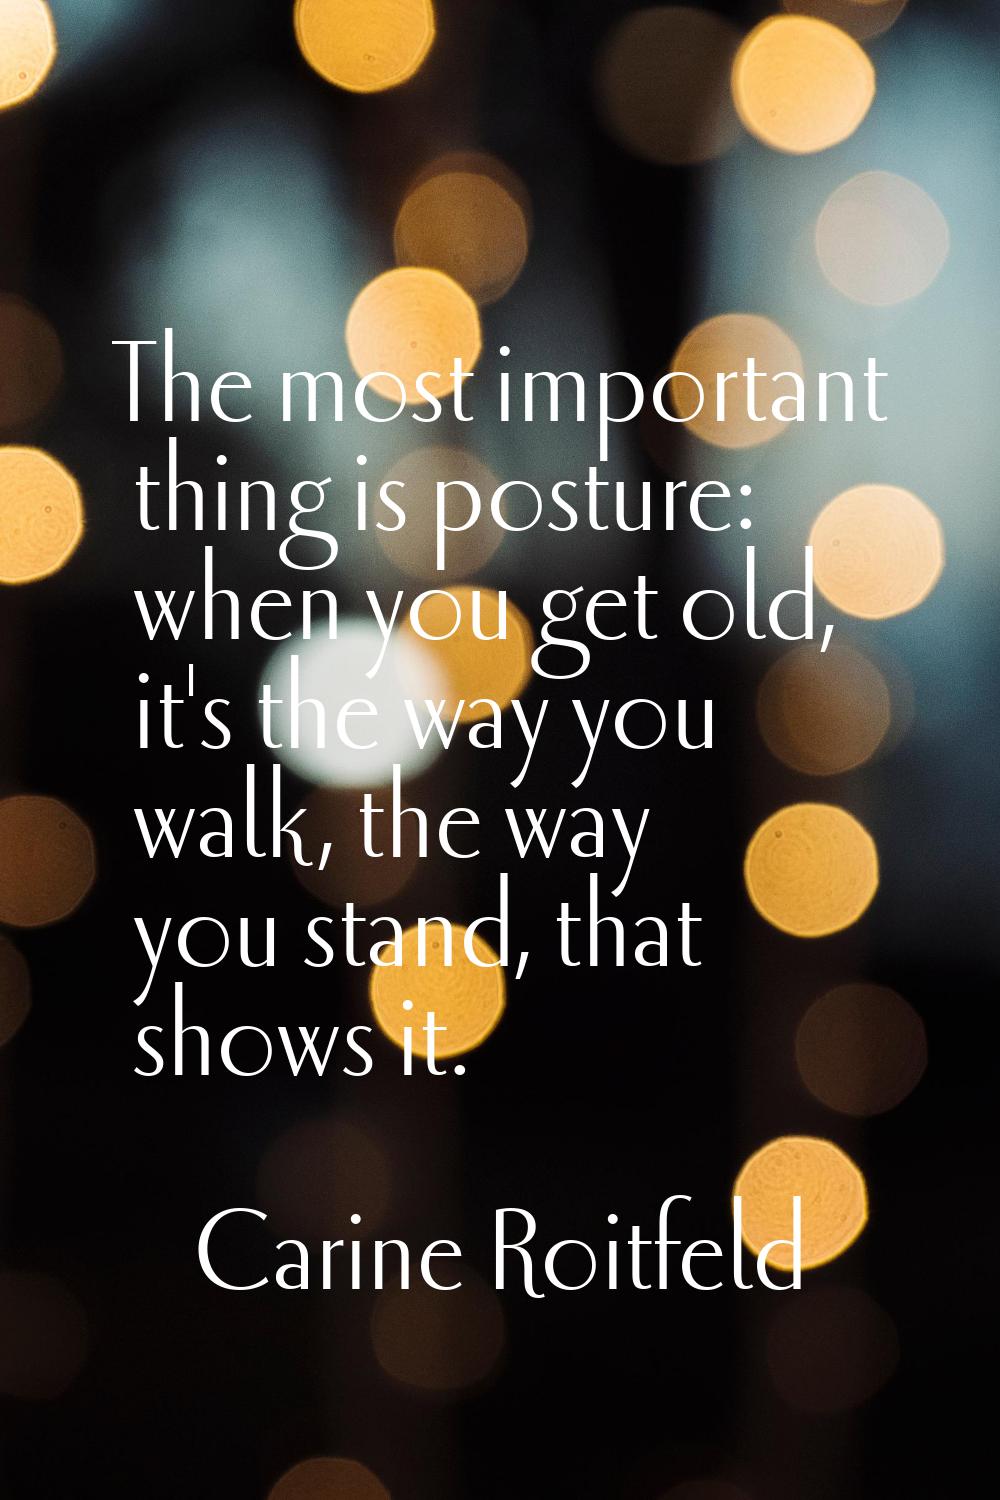 The most important thing is posture: when you get old, it's the way you walk, the way you stand, th